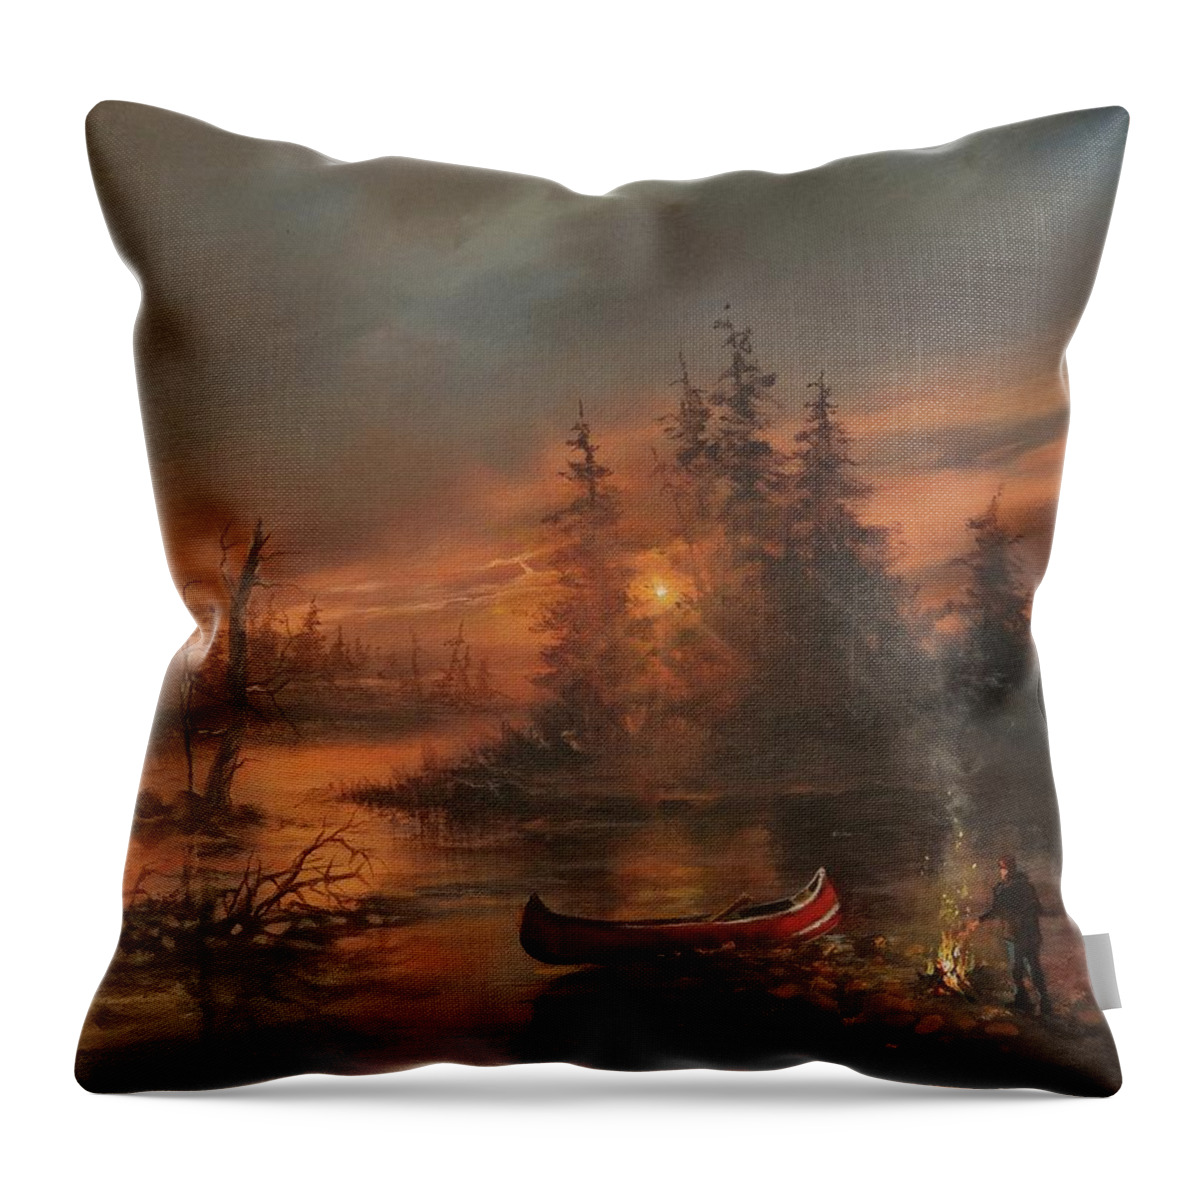 Lake Throw Pillow featuring the painting Northern Solitude by Tom Shropshire